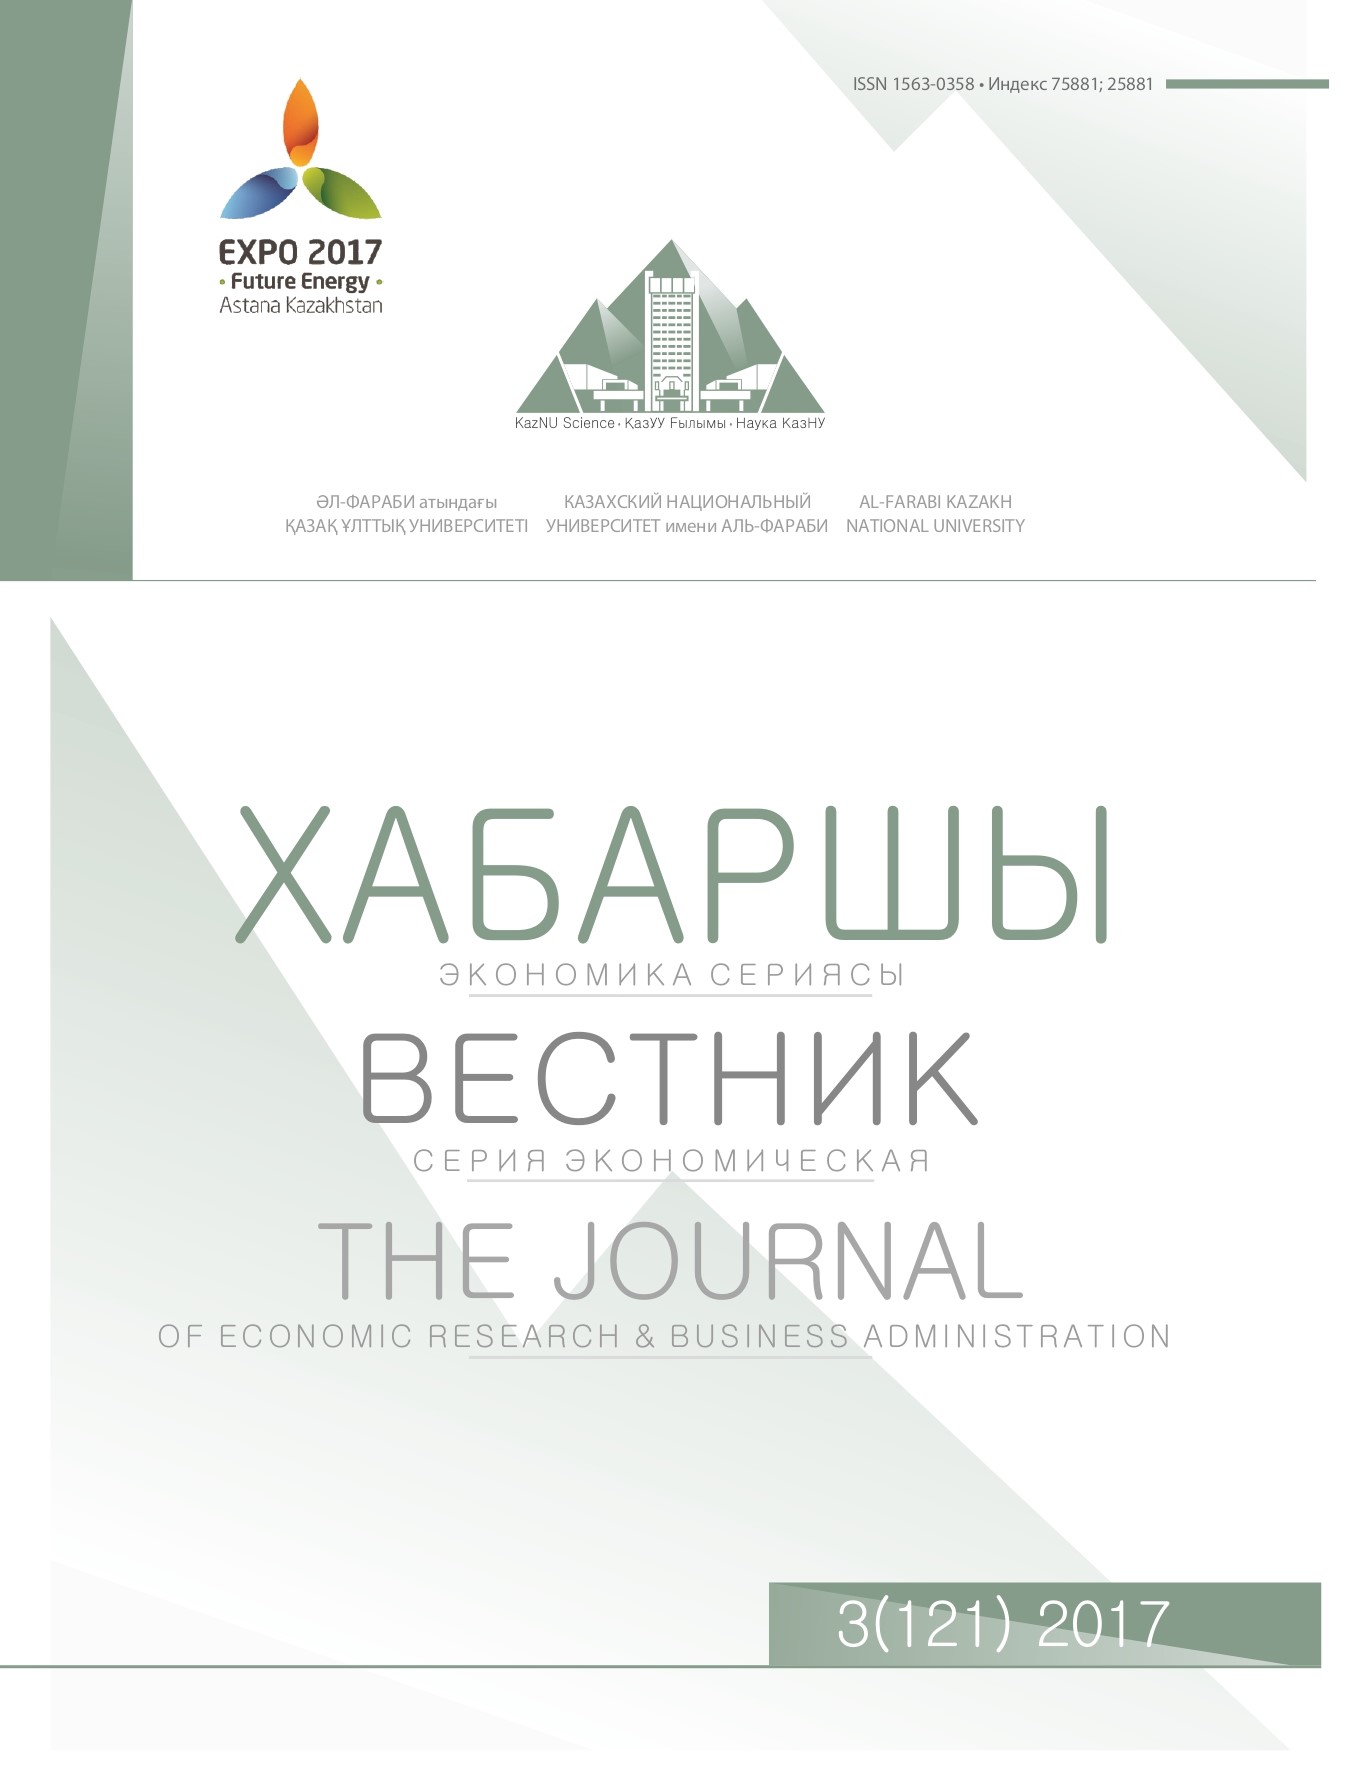 					View Vol. 121 No. 3 (2017): The Journal of Economic Research & Business Administration
				